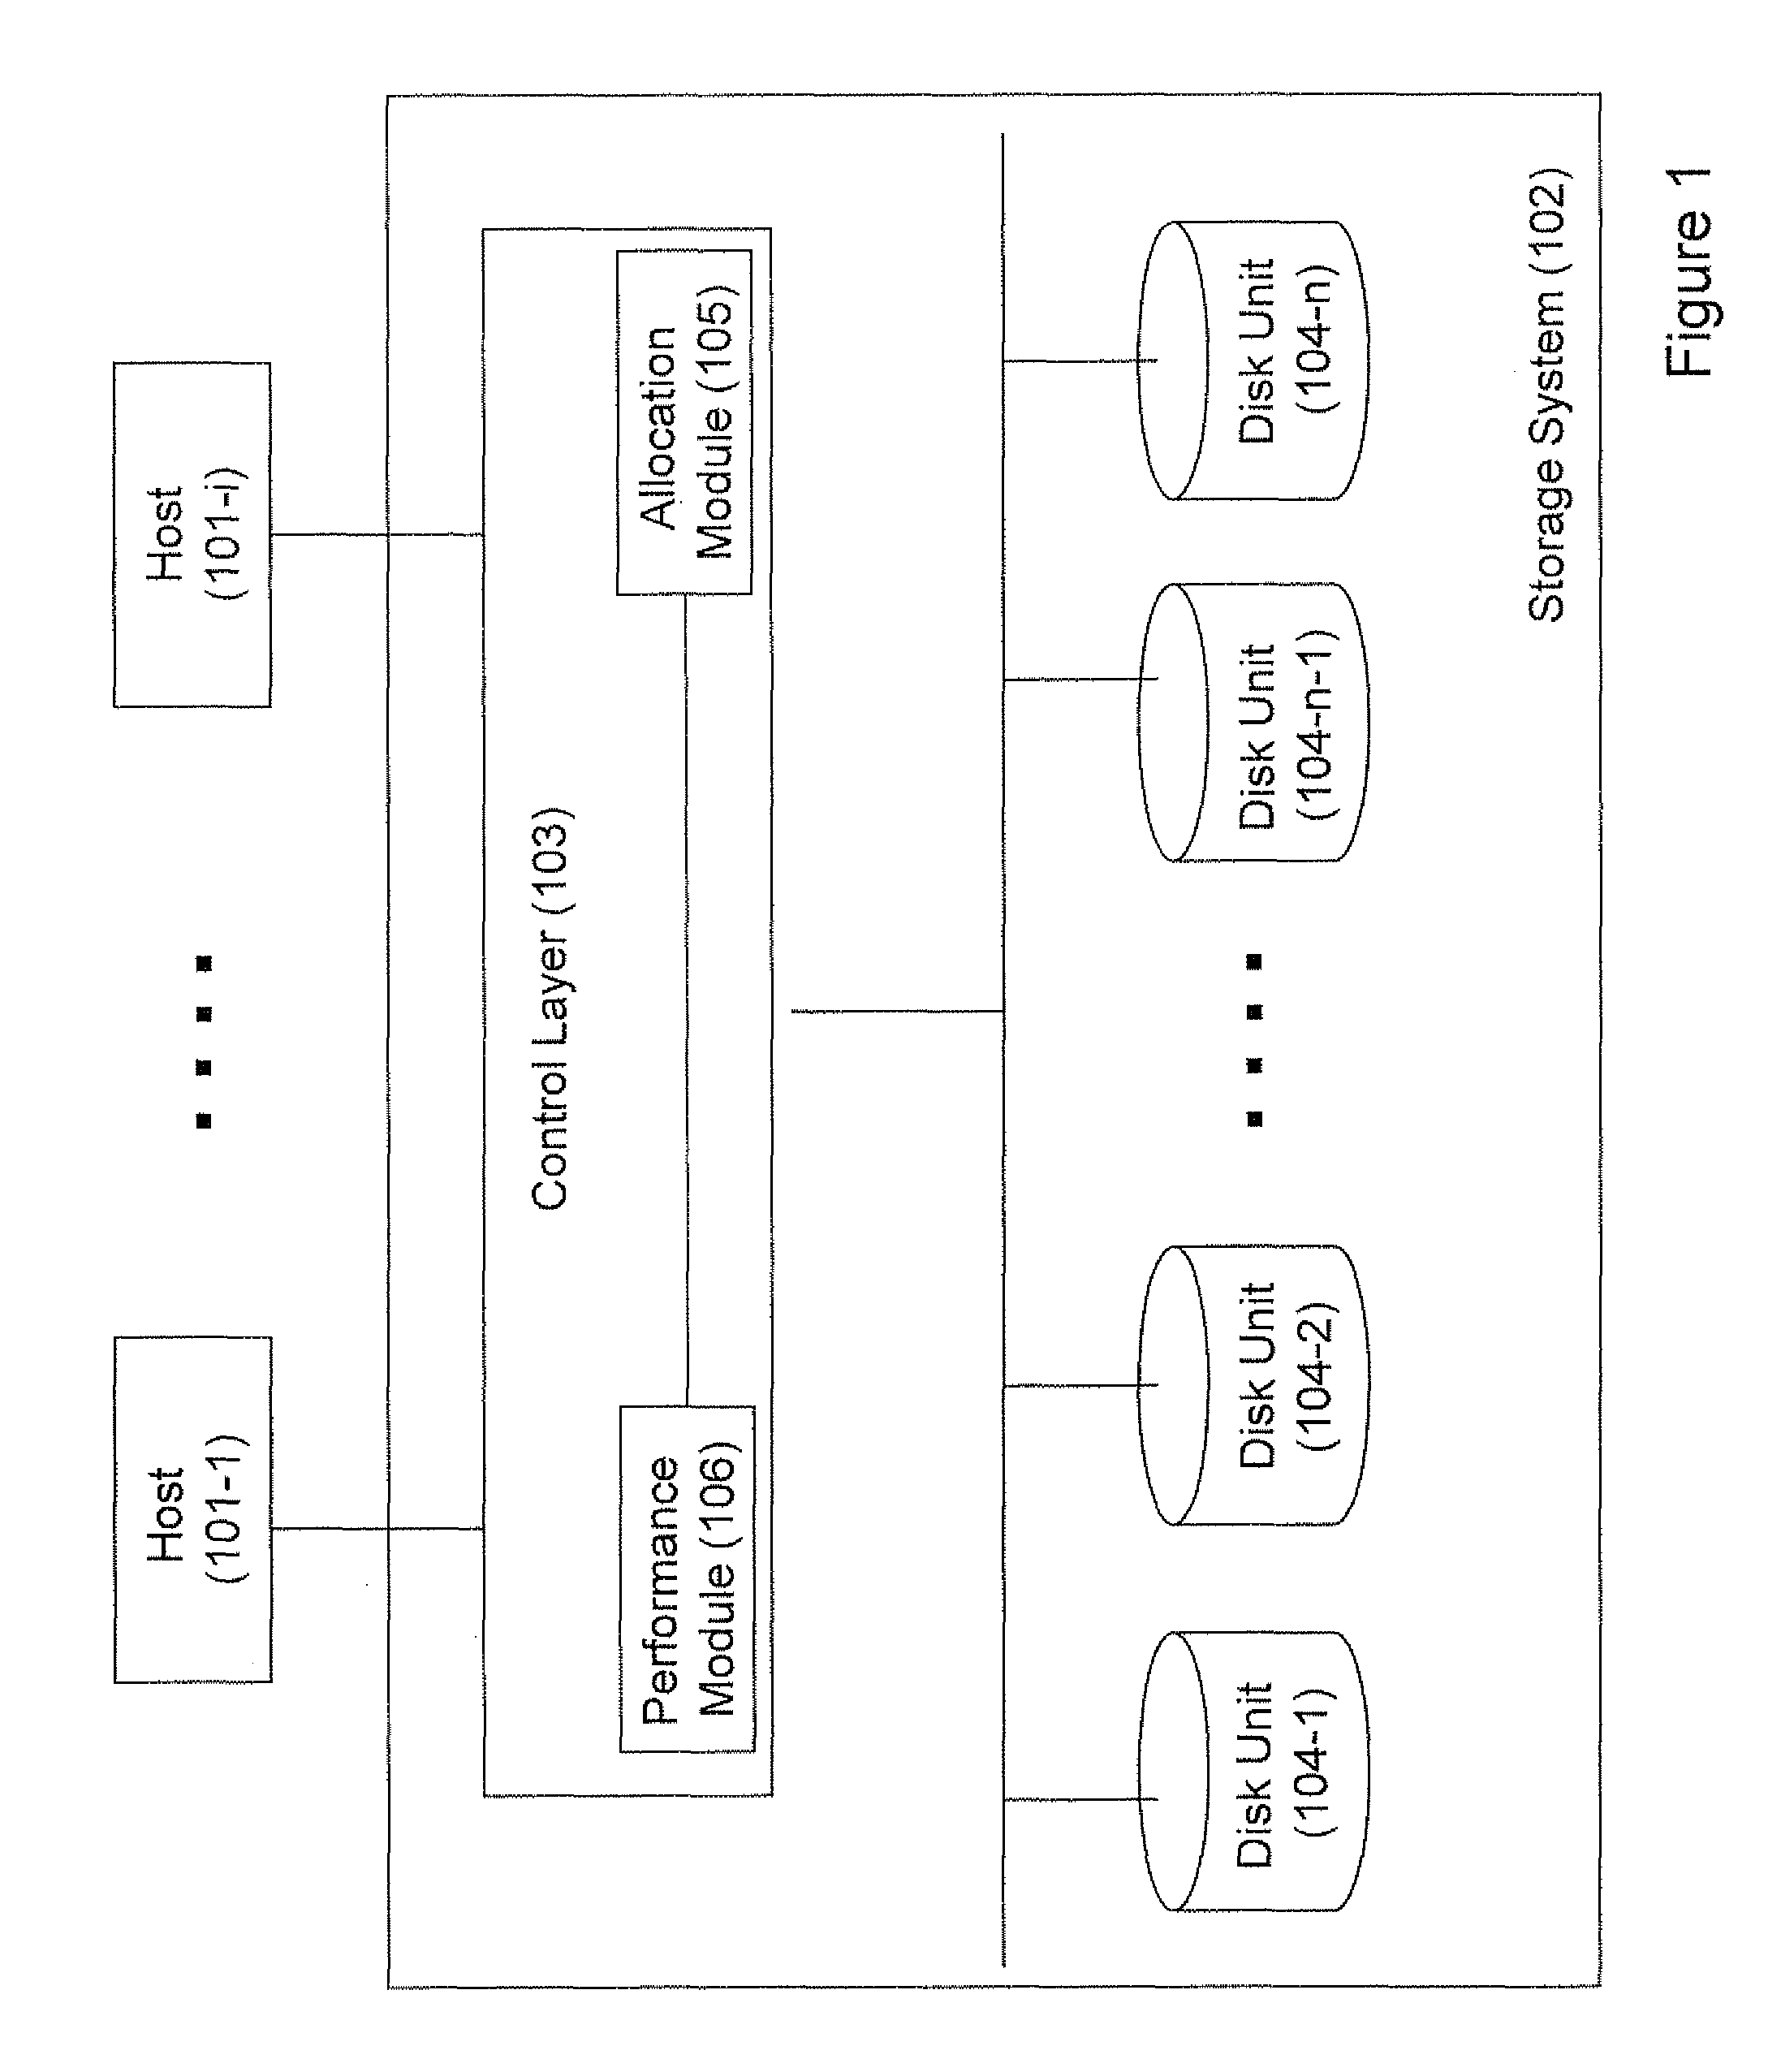 Mass storage system and method of operating thereof